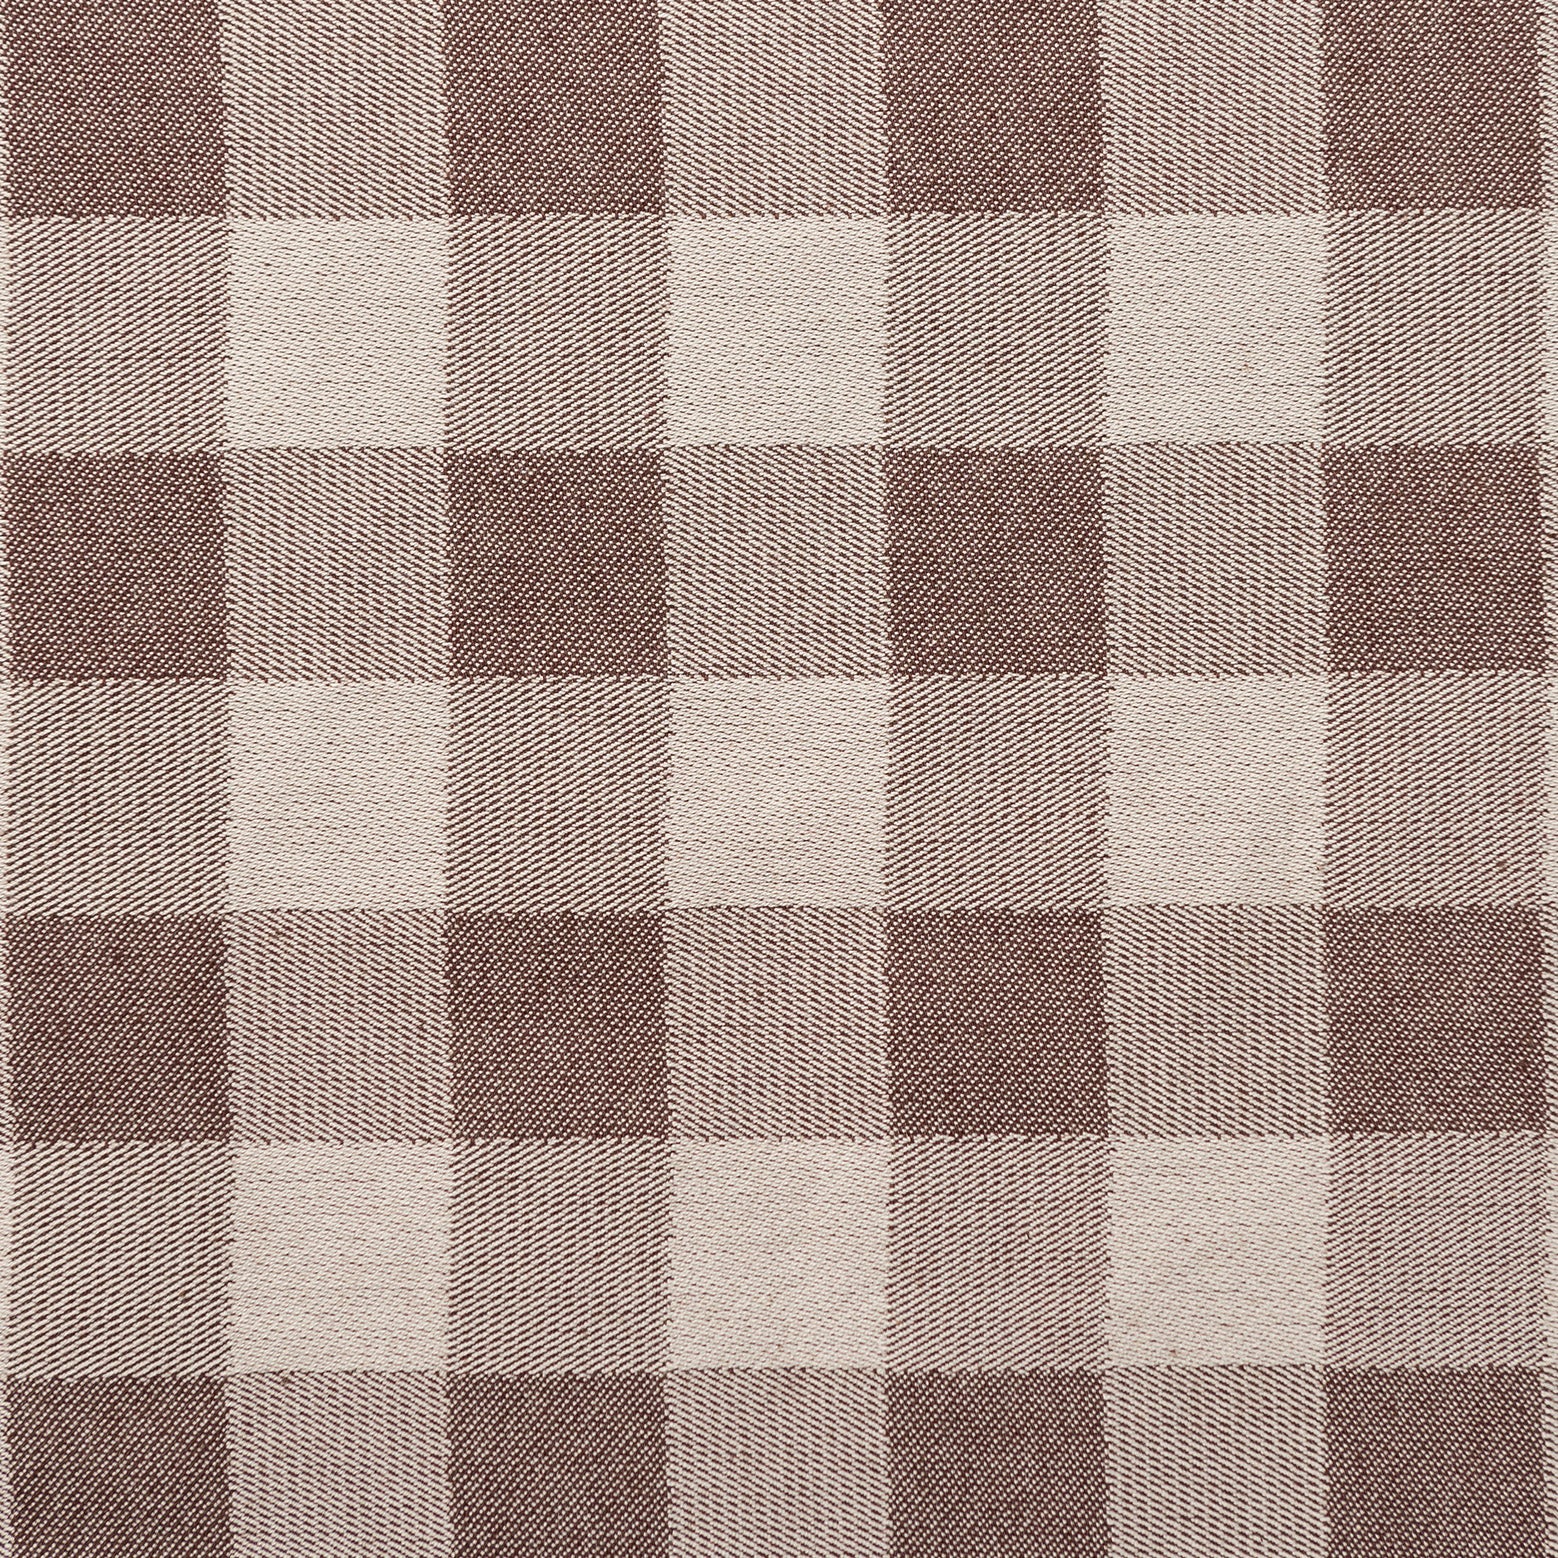 Woodhouse Check Cotton Fabric Chestnut